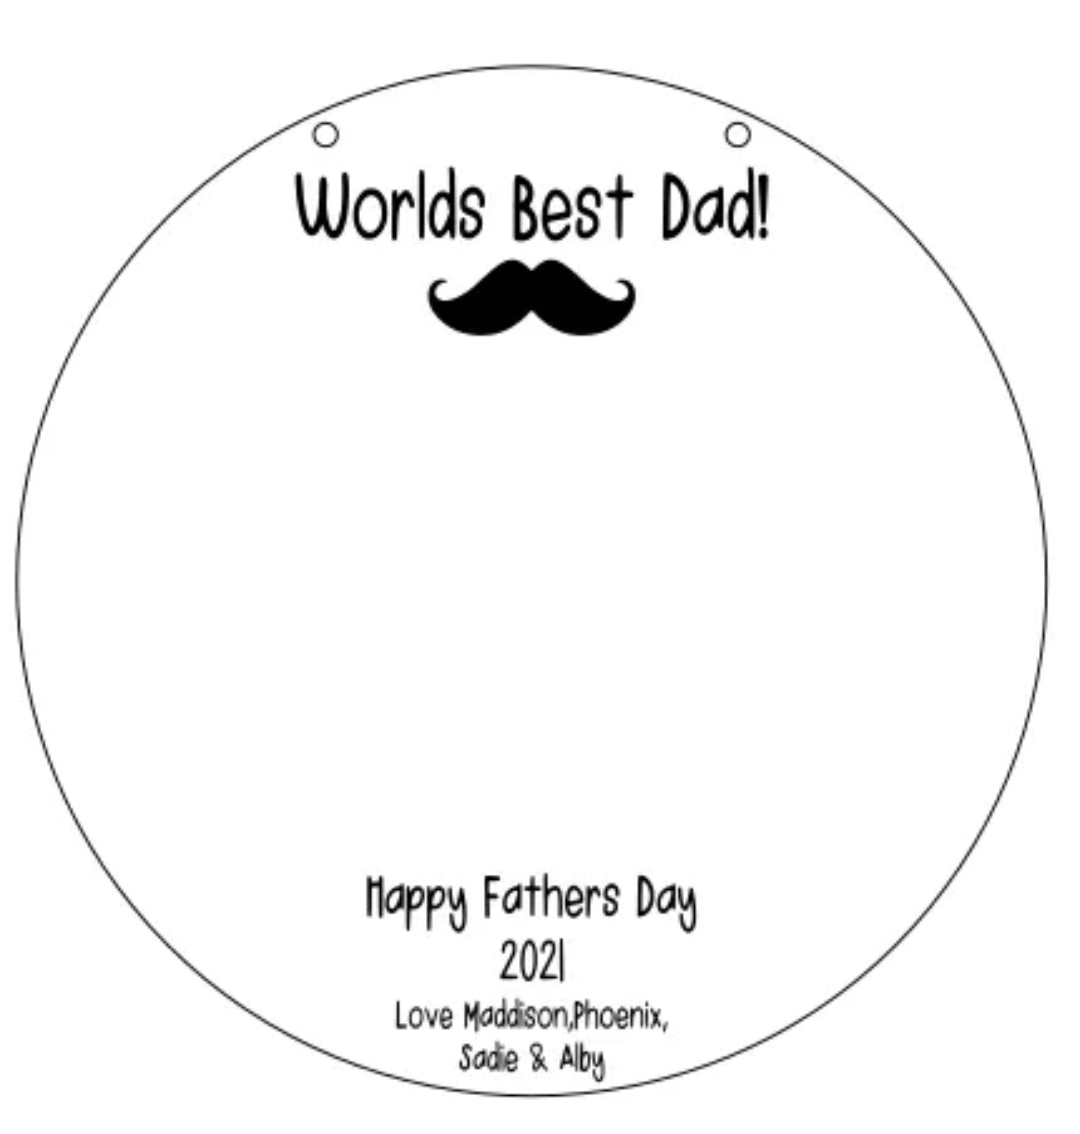 Fathers day drawing plaque